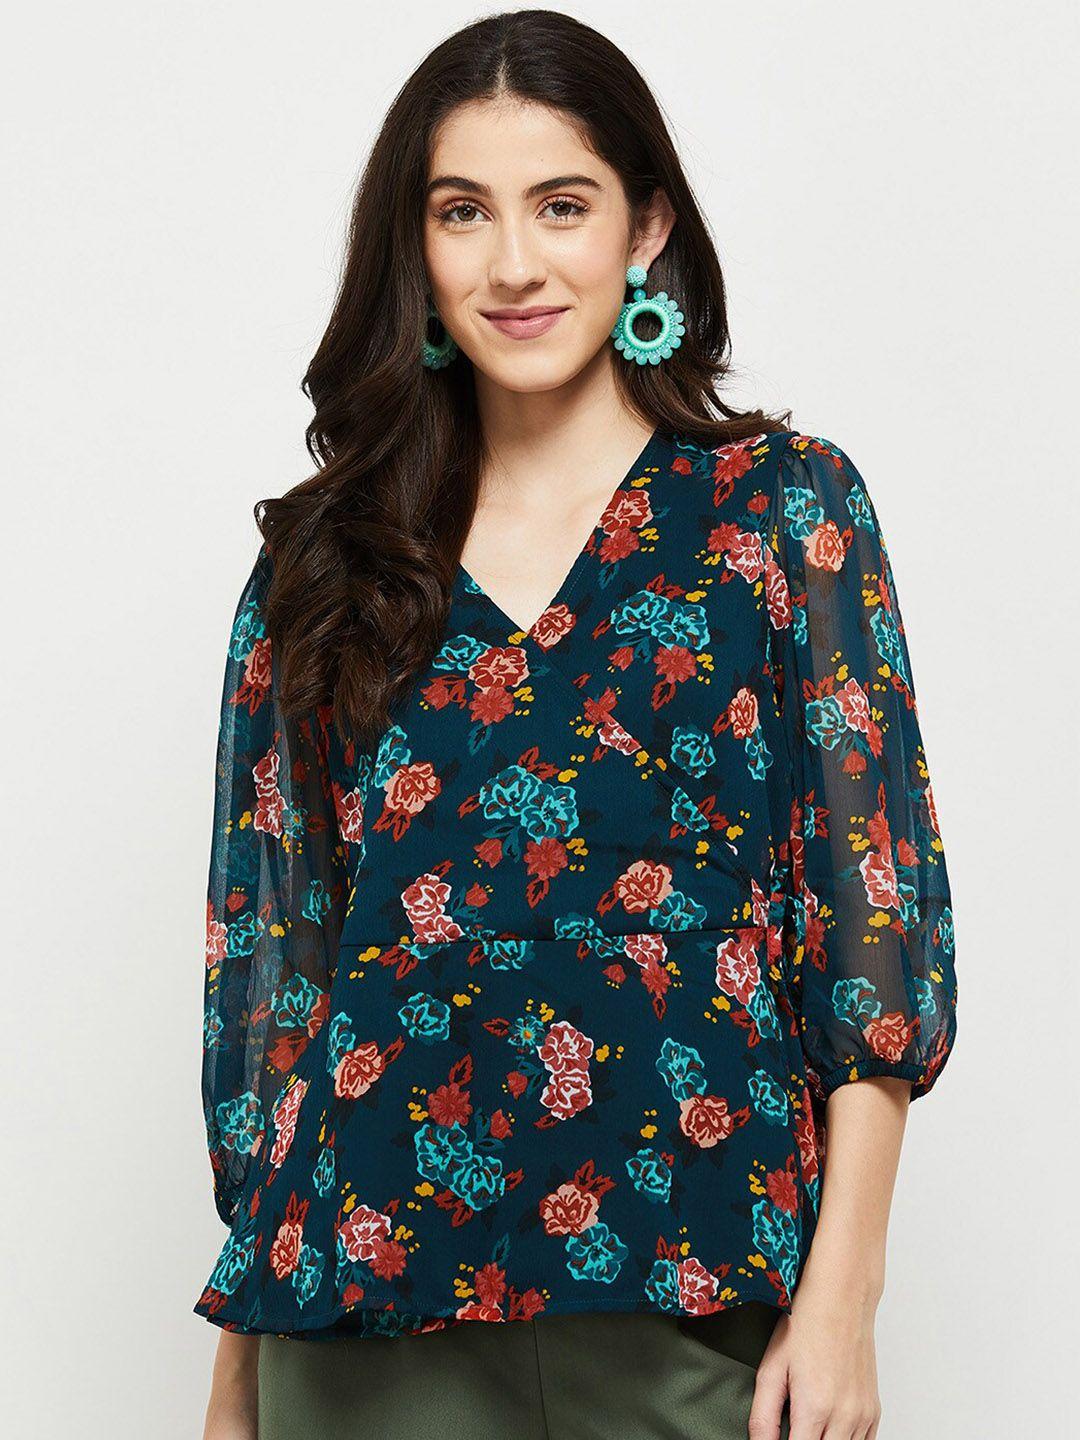 max Women Teal Blue & Red Floral Print Wrap Top